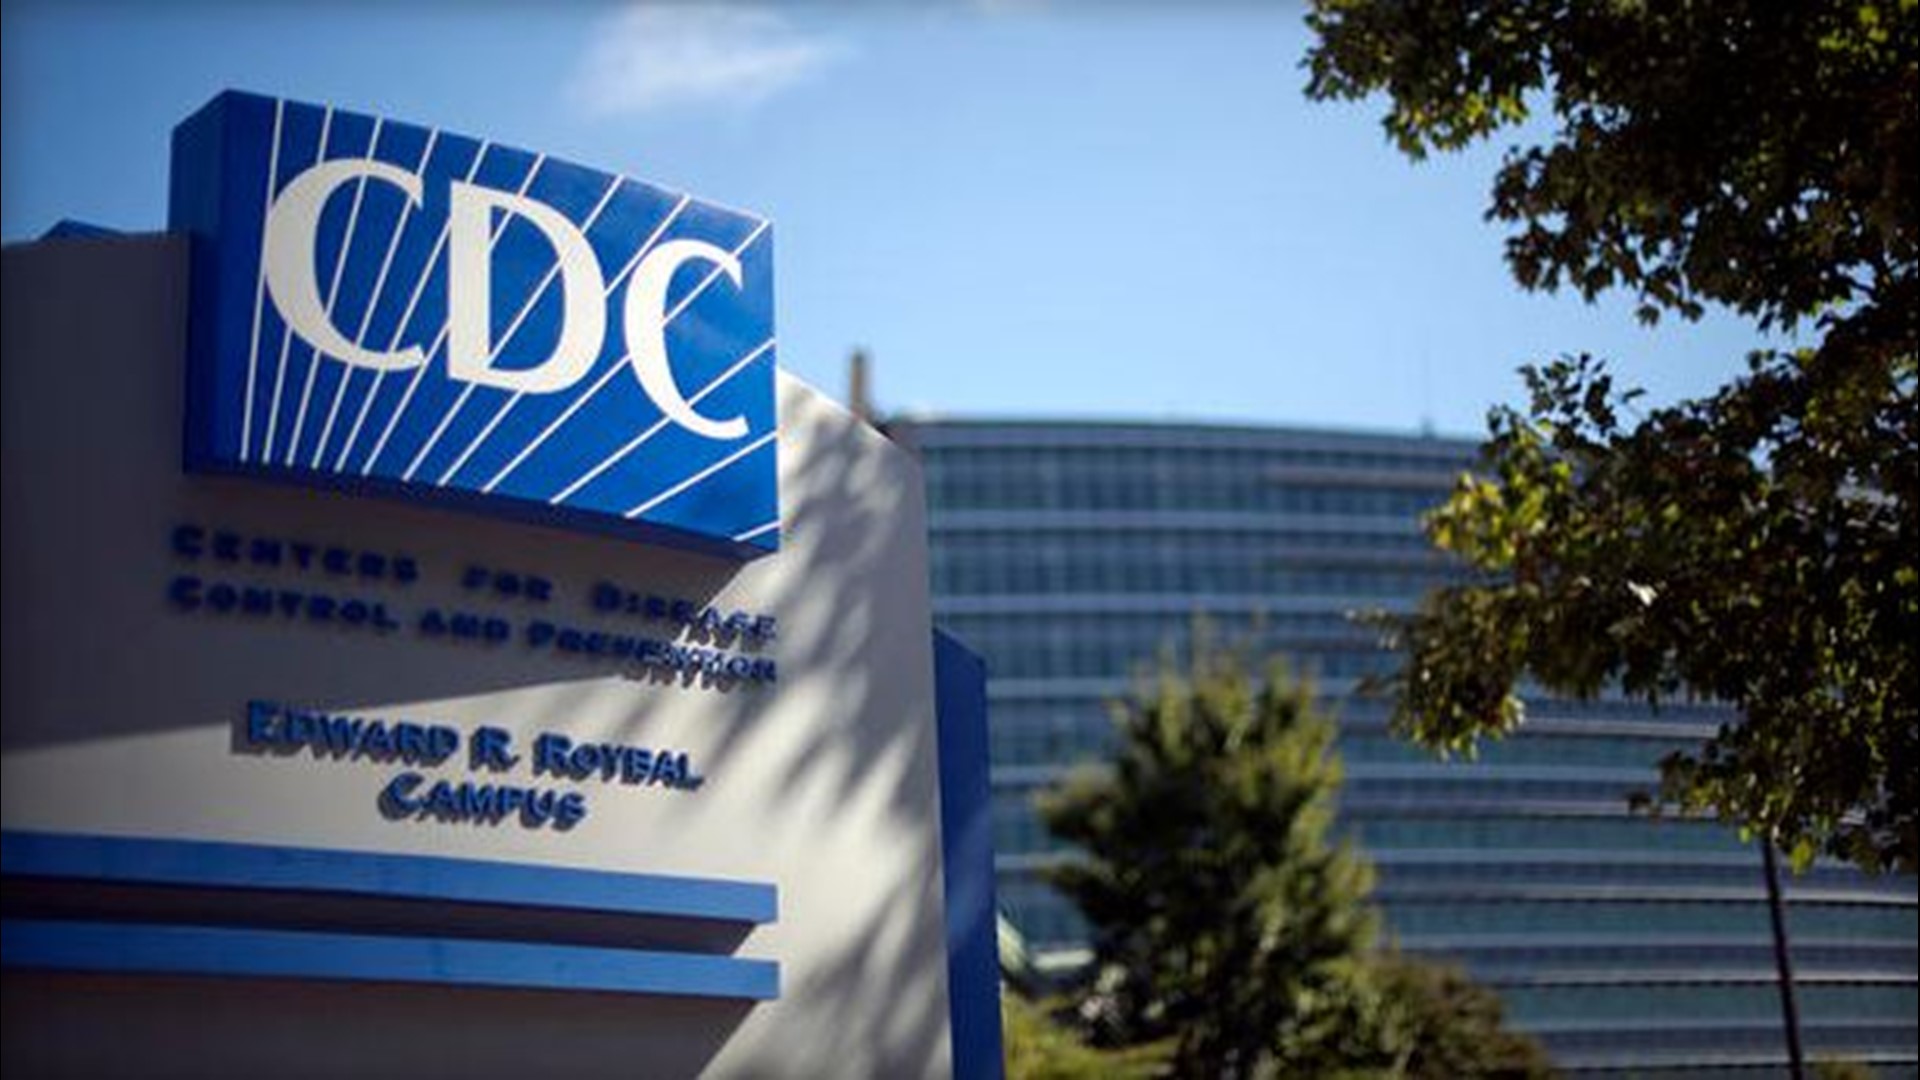 The CDC is currently investigating the cause of several reported E. coli cases in Ohio, Michigan, Pennsylvania and Indiana.